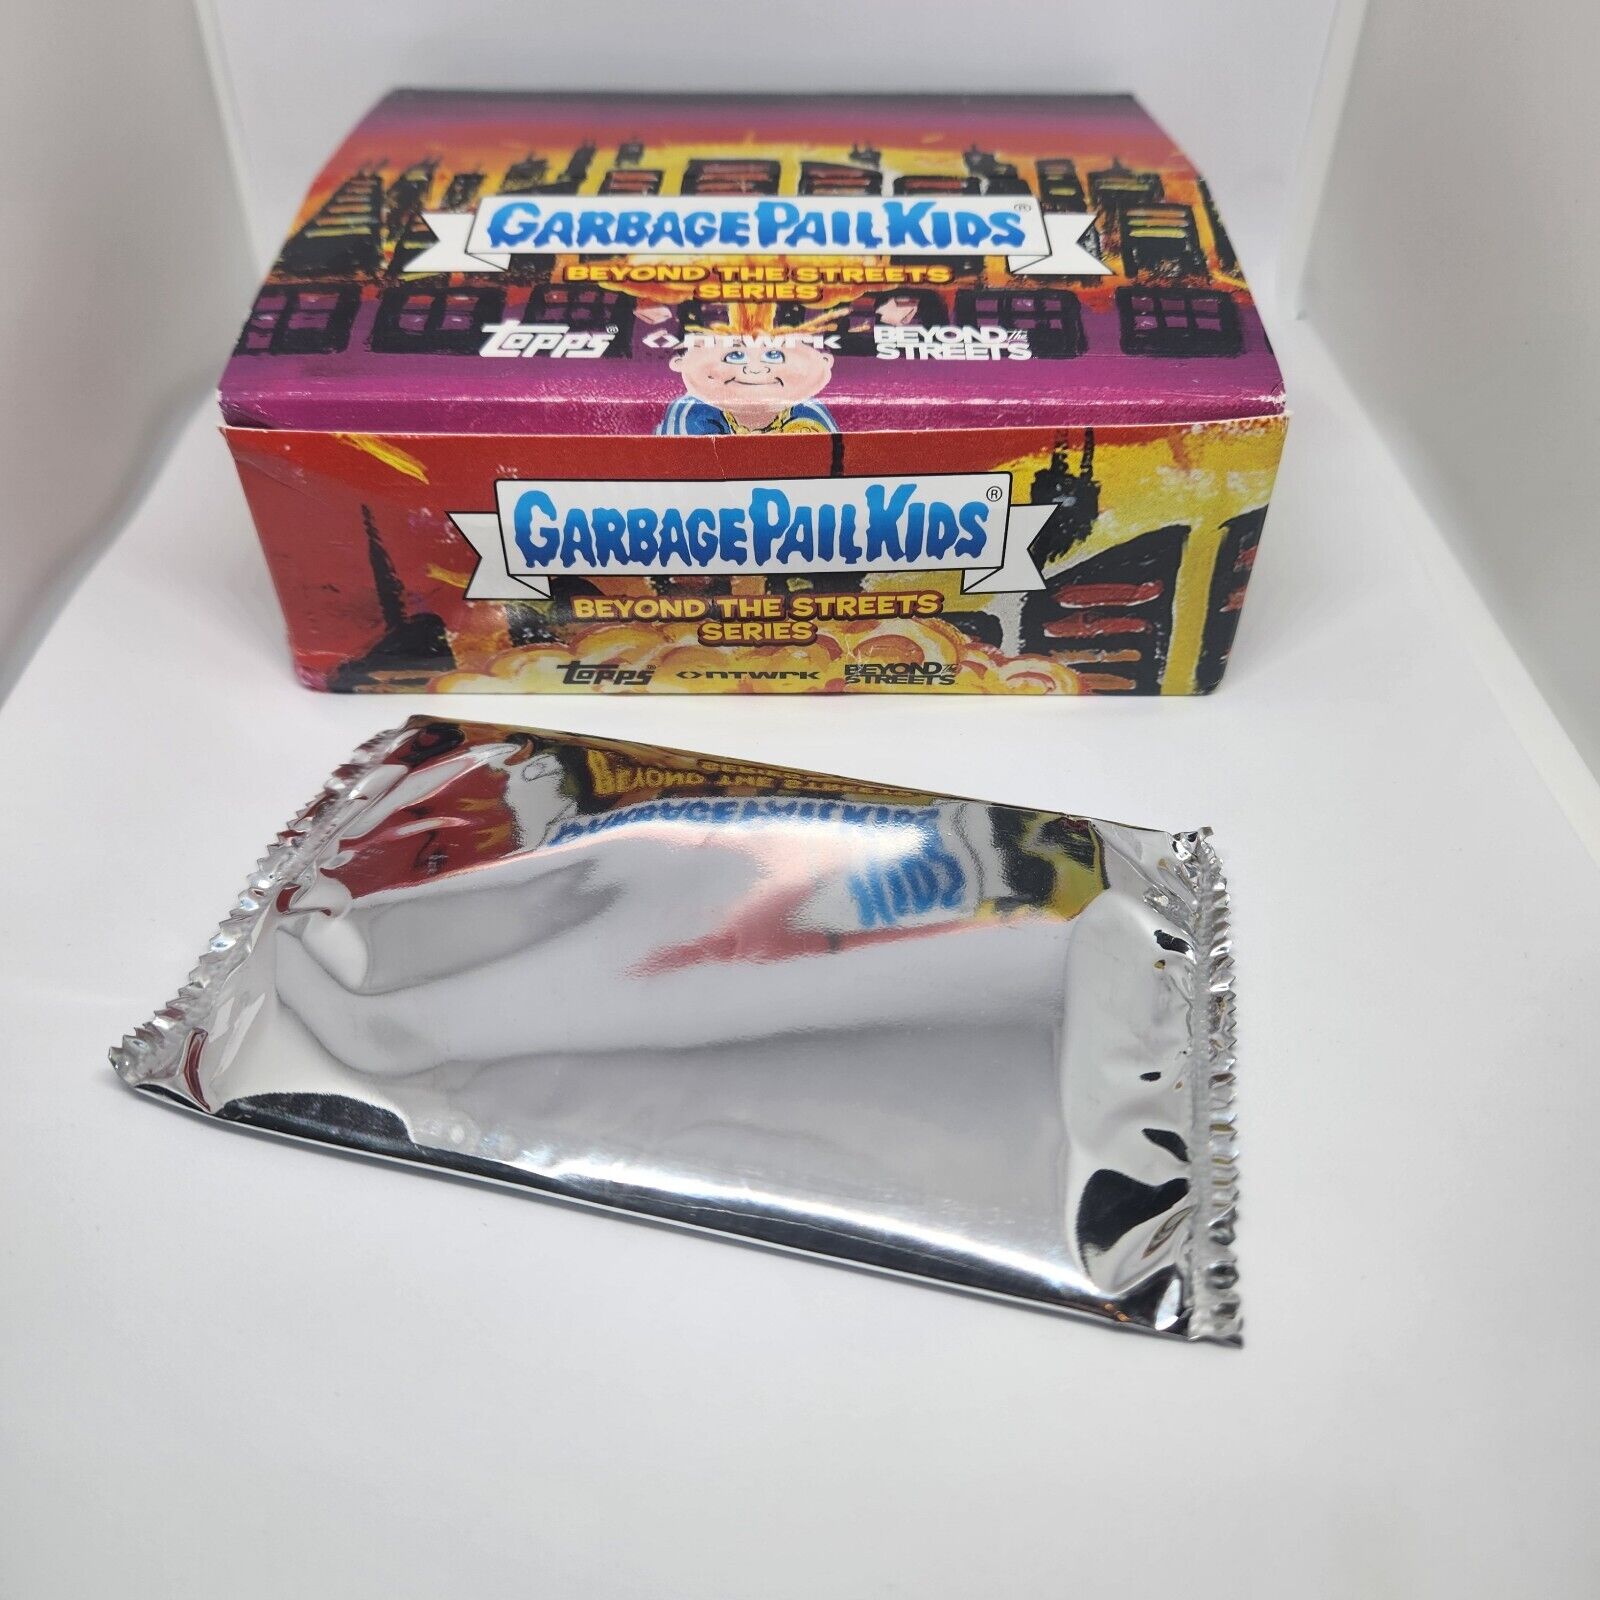 Garbage Pail Kids BEYOND THE STREETS SERIES 1 - One UNOPENED PACK